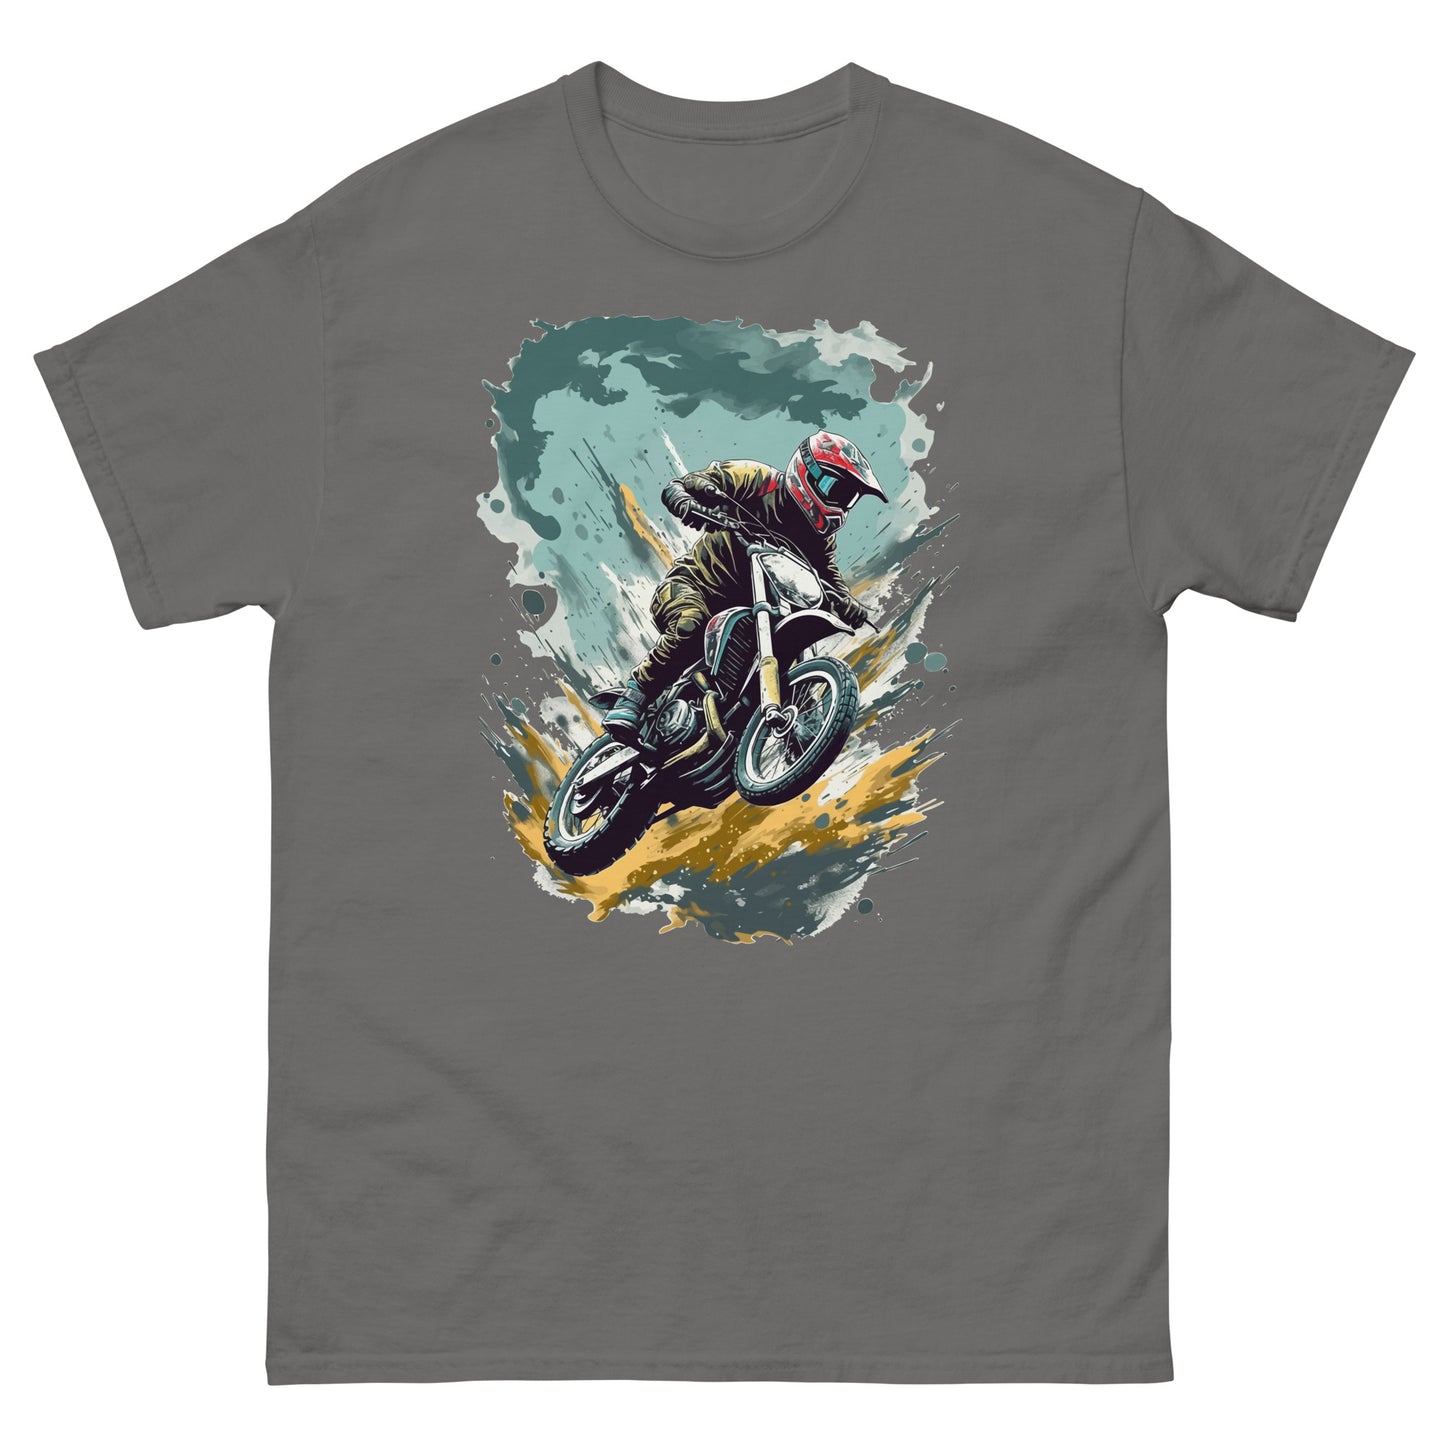 Motorbike jump, Moto race and speed lovers, Gift for a motorcyclist, Motorcycle illustration - Men's classic tee